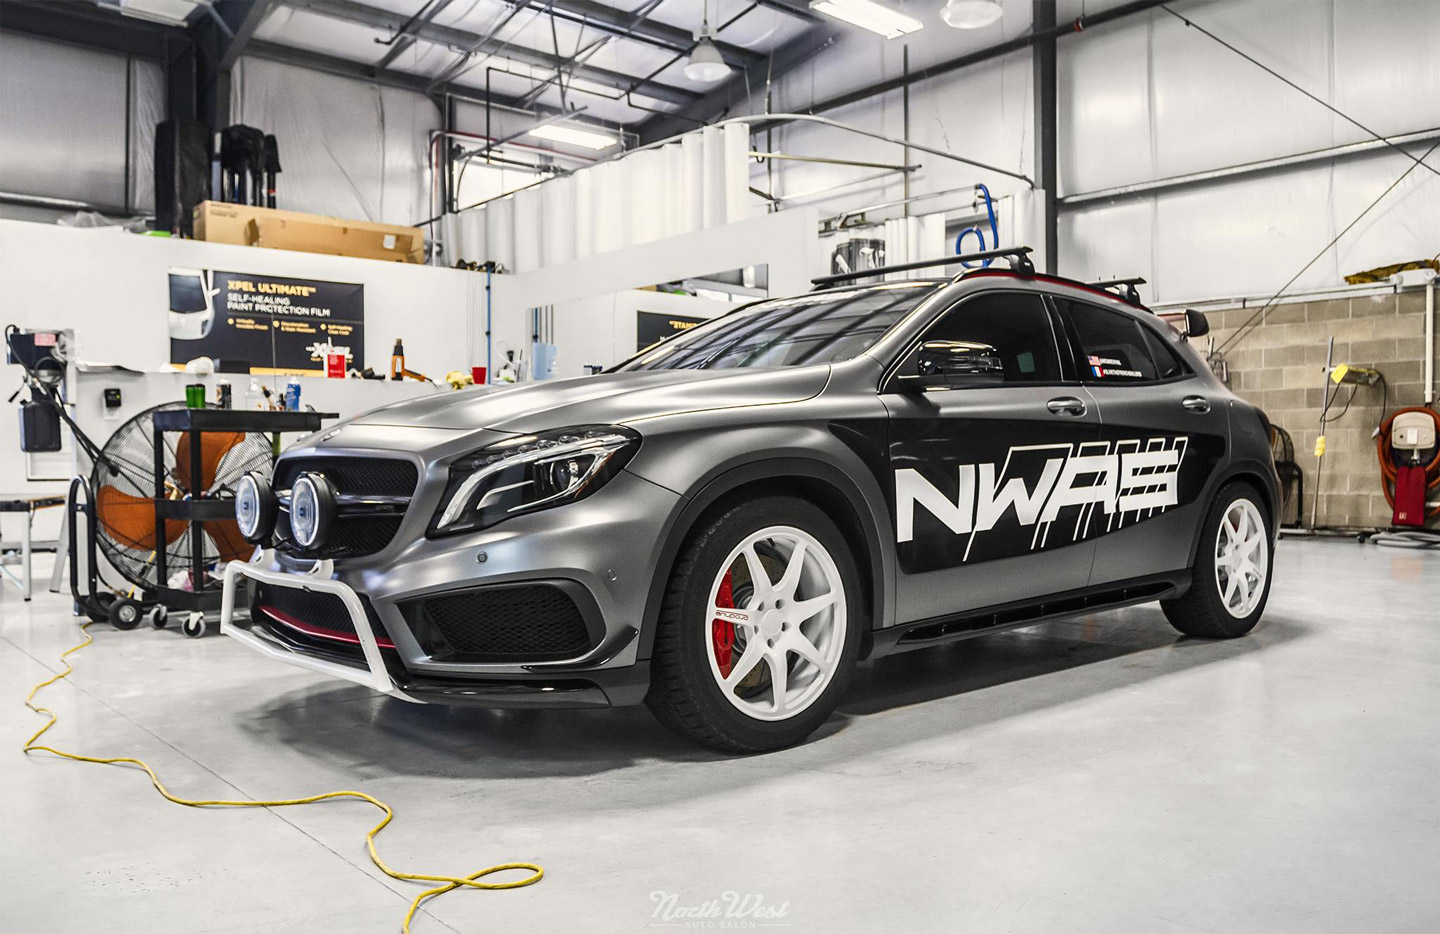 Ceramic-Pro-Gold-Package-Seattle-GLA45-AMG-NWAS